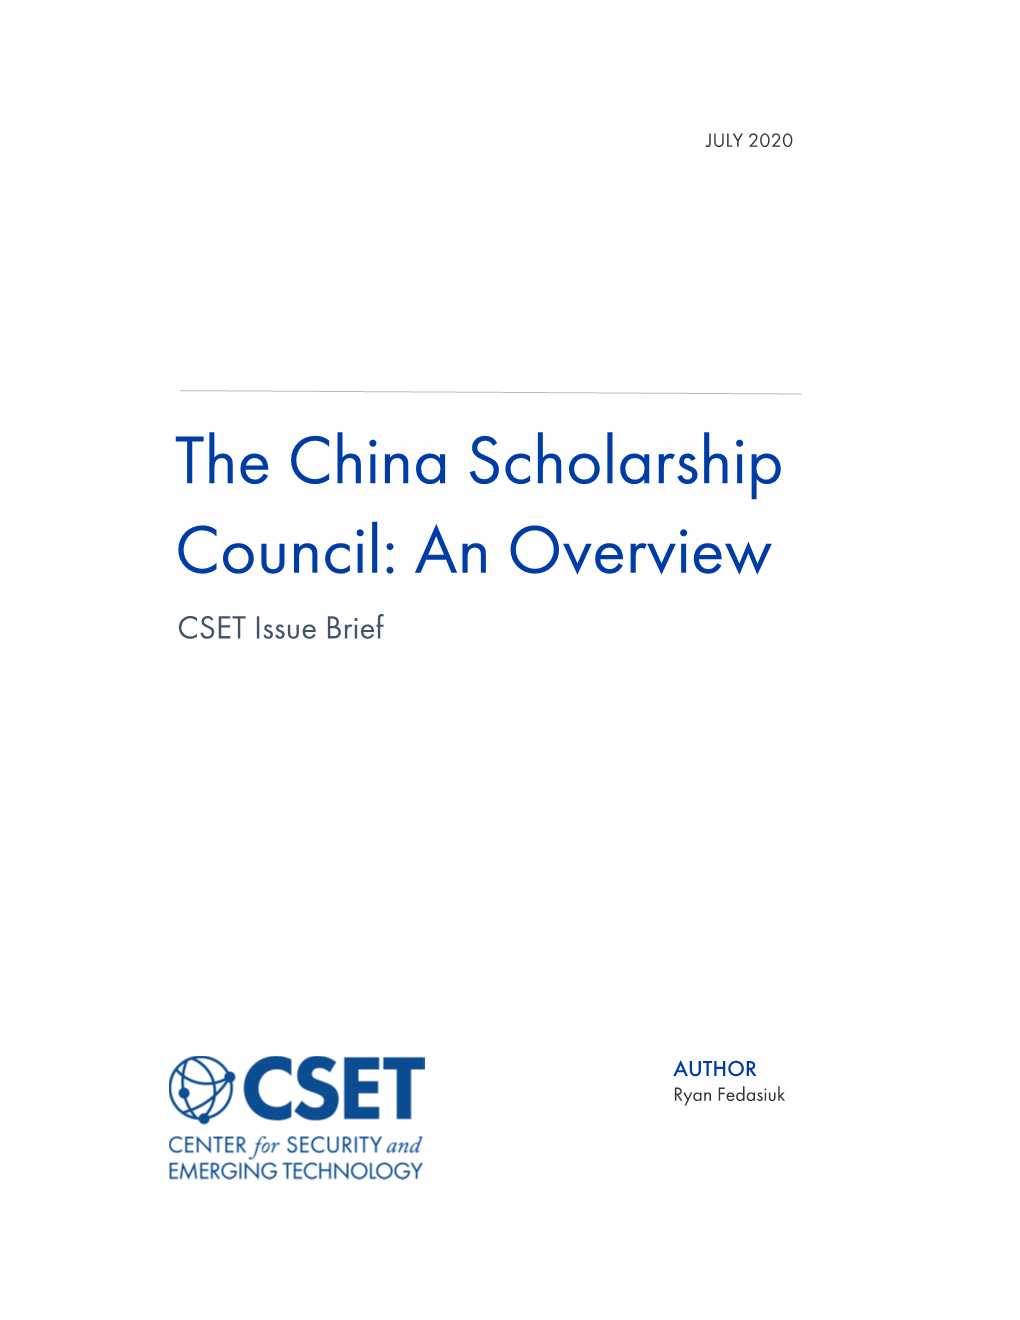 China Scholarship Council: an Overview CSET Issue Brief